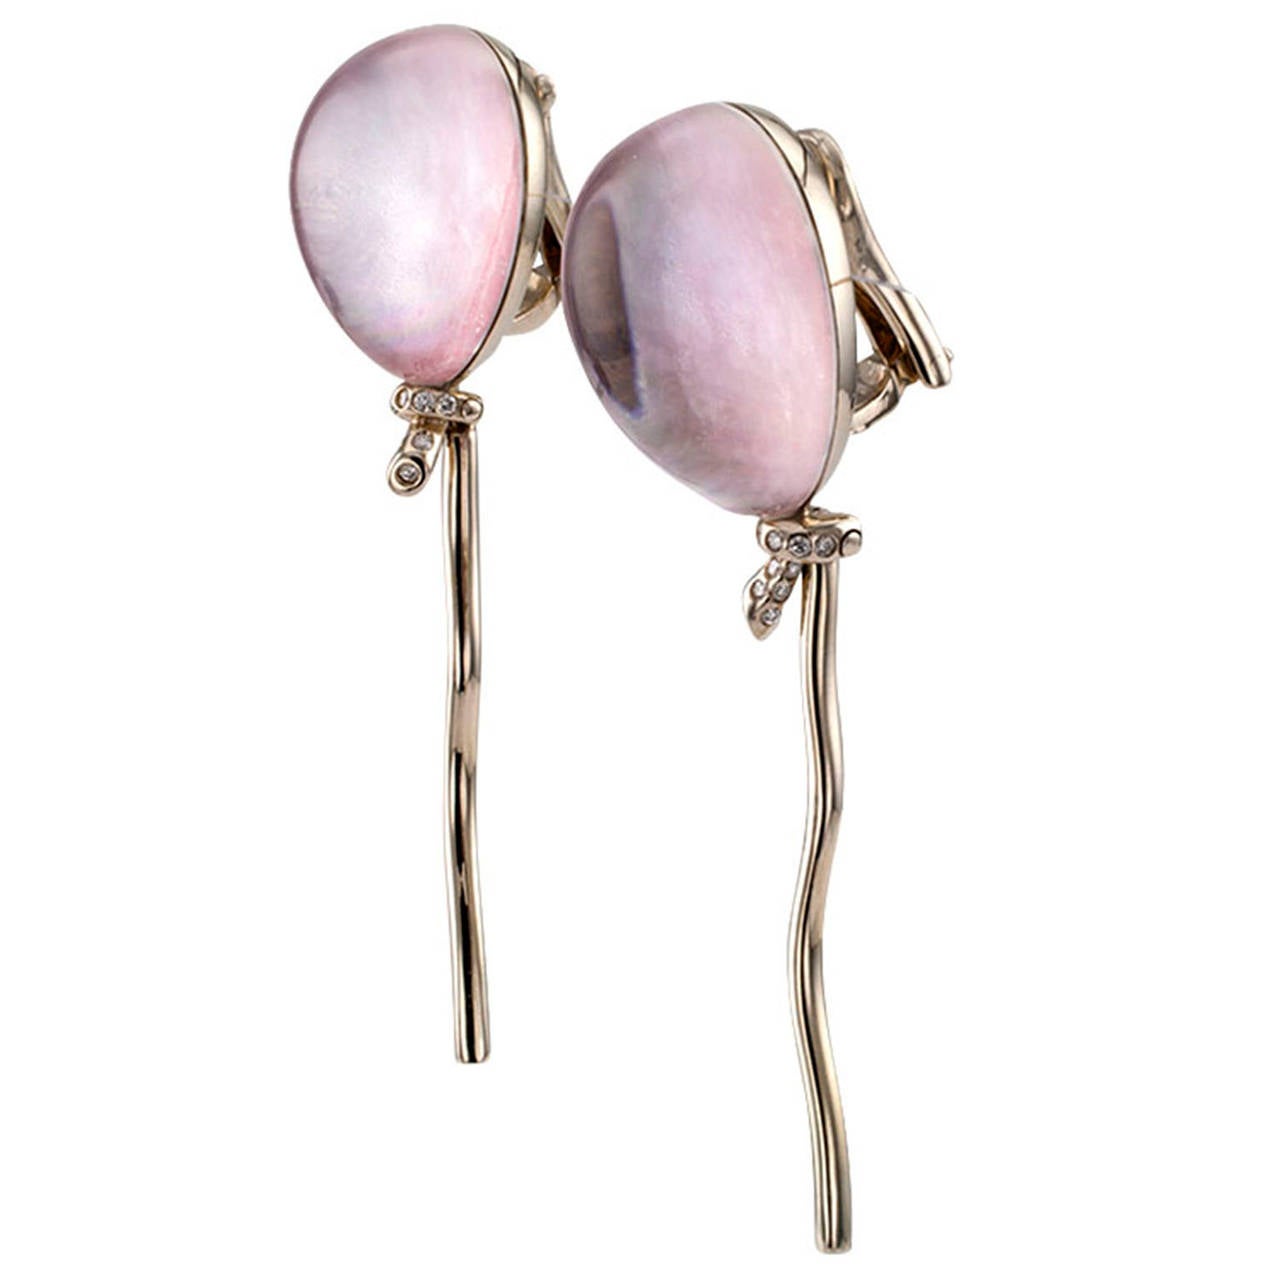 Totally different, stylish and very whimsical, Vernier's design features bezel-set cabochon pink quartz shaped to resemble a balloon tied to a string of gold, the knot set with small round diamonds totaling approximately 0.12 carat, mounted in 18